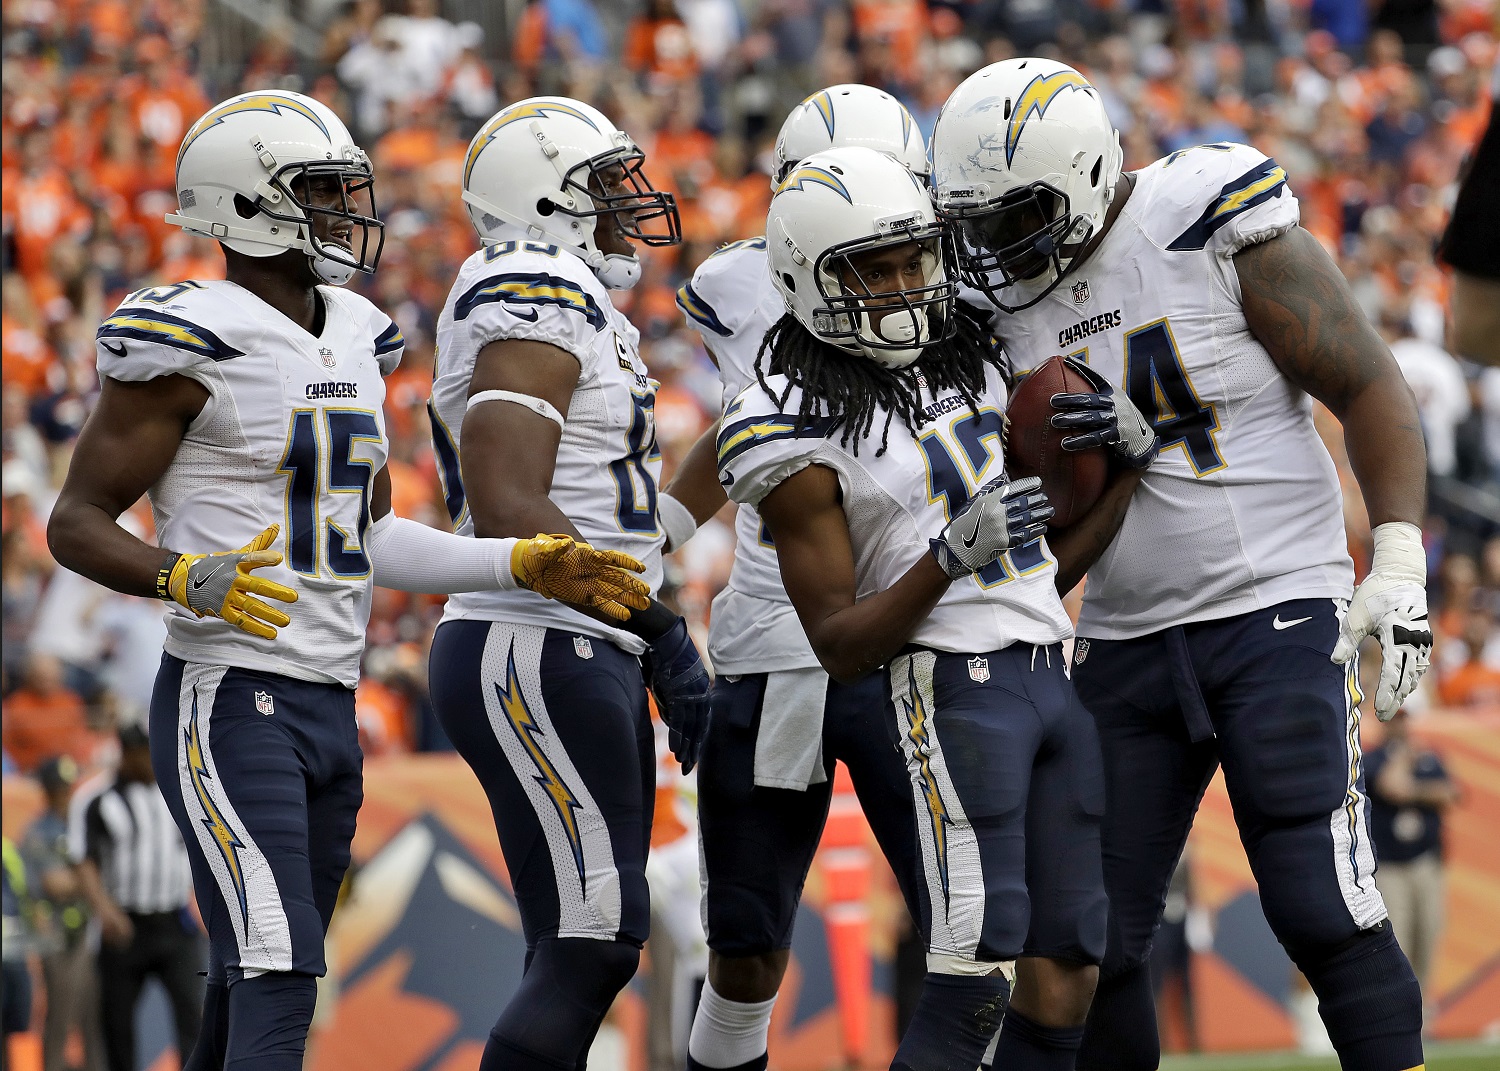 San Diego Chargers wide receiver Travis Benjamin (12) celebrates his touchdown with teammates Orlando Franklin (74) and Dontrelle Inman (15) during the second half of an NFL football game against the Denver Broncos, Sunday, Oct. 30, 2016, in Denver. (AP Photo/Jack Dempsey)